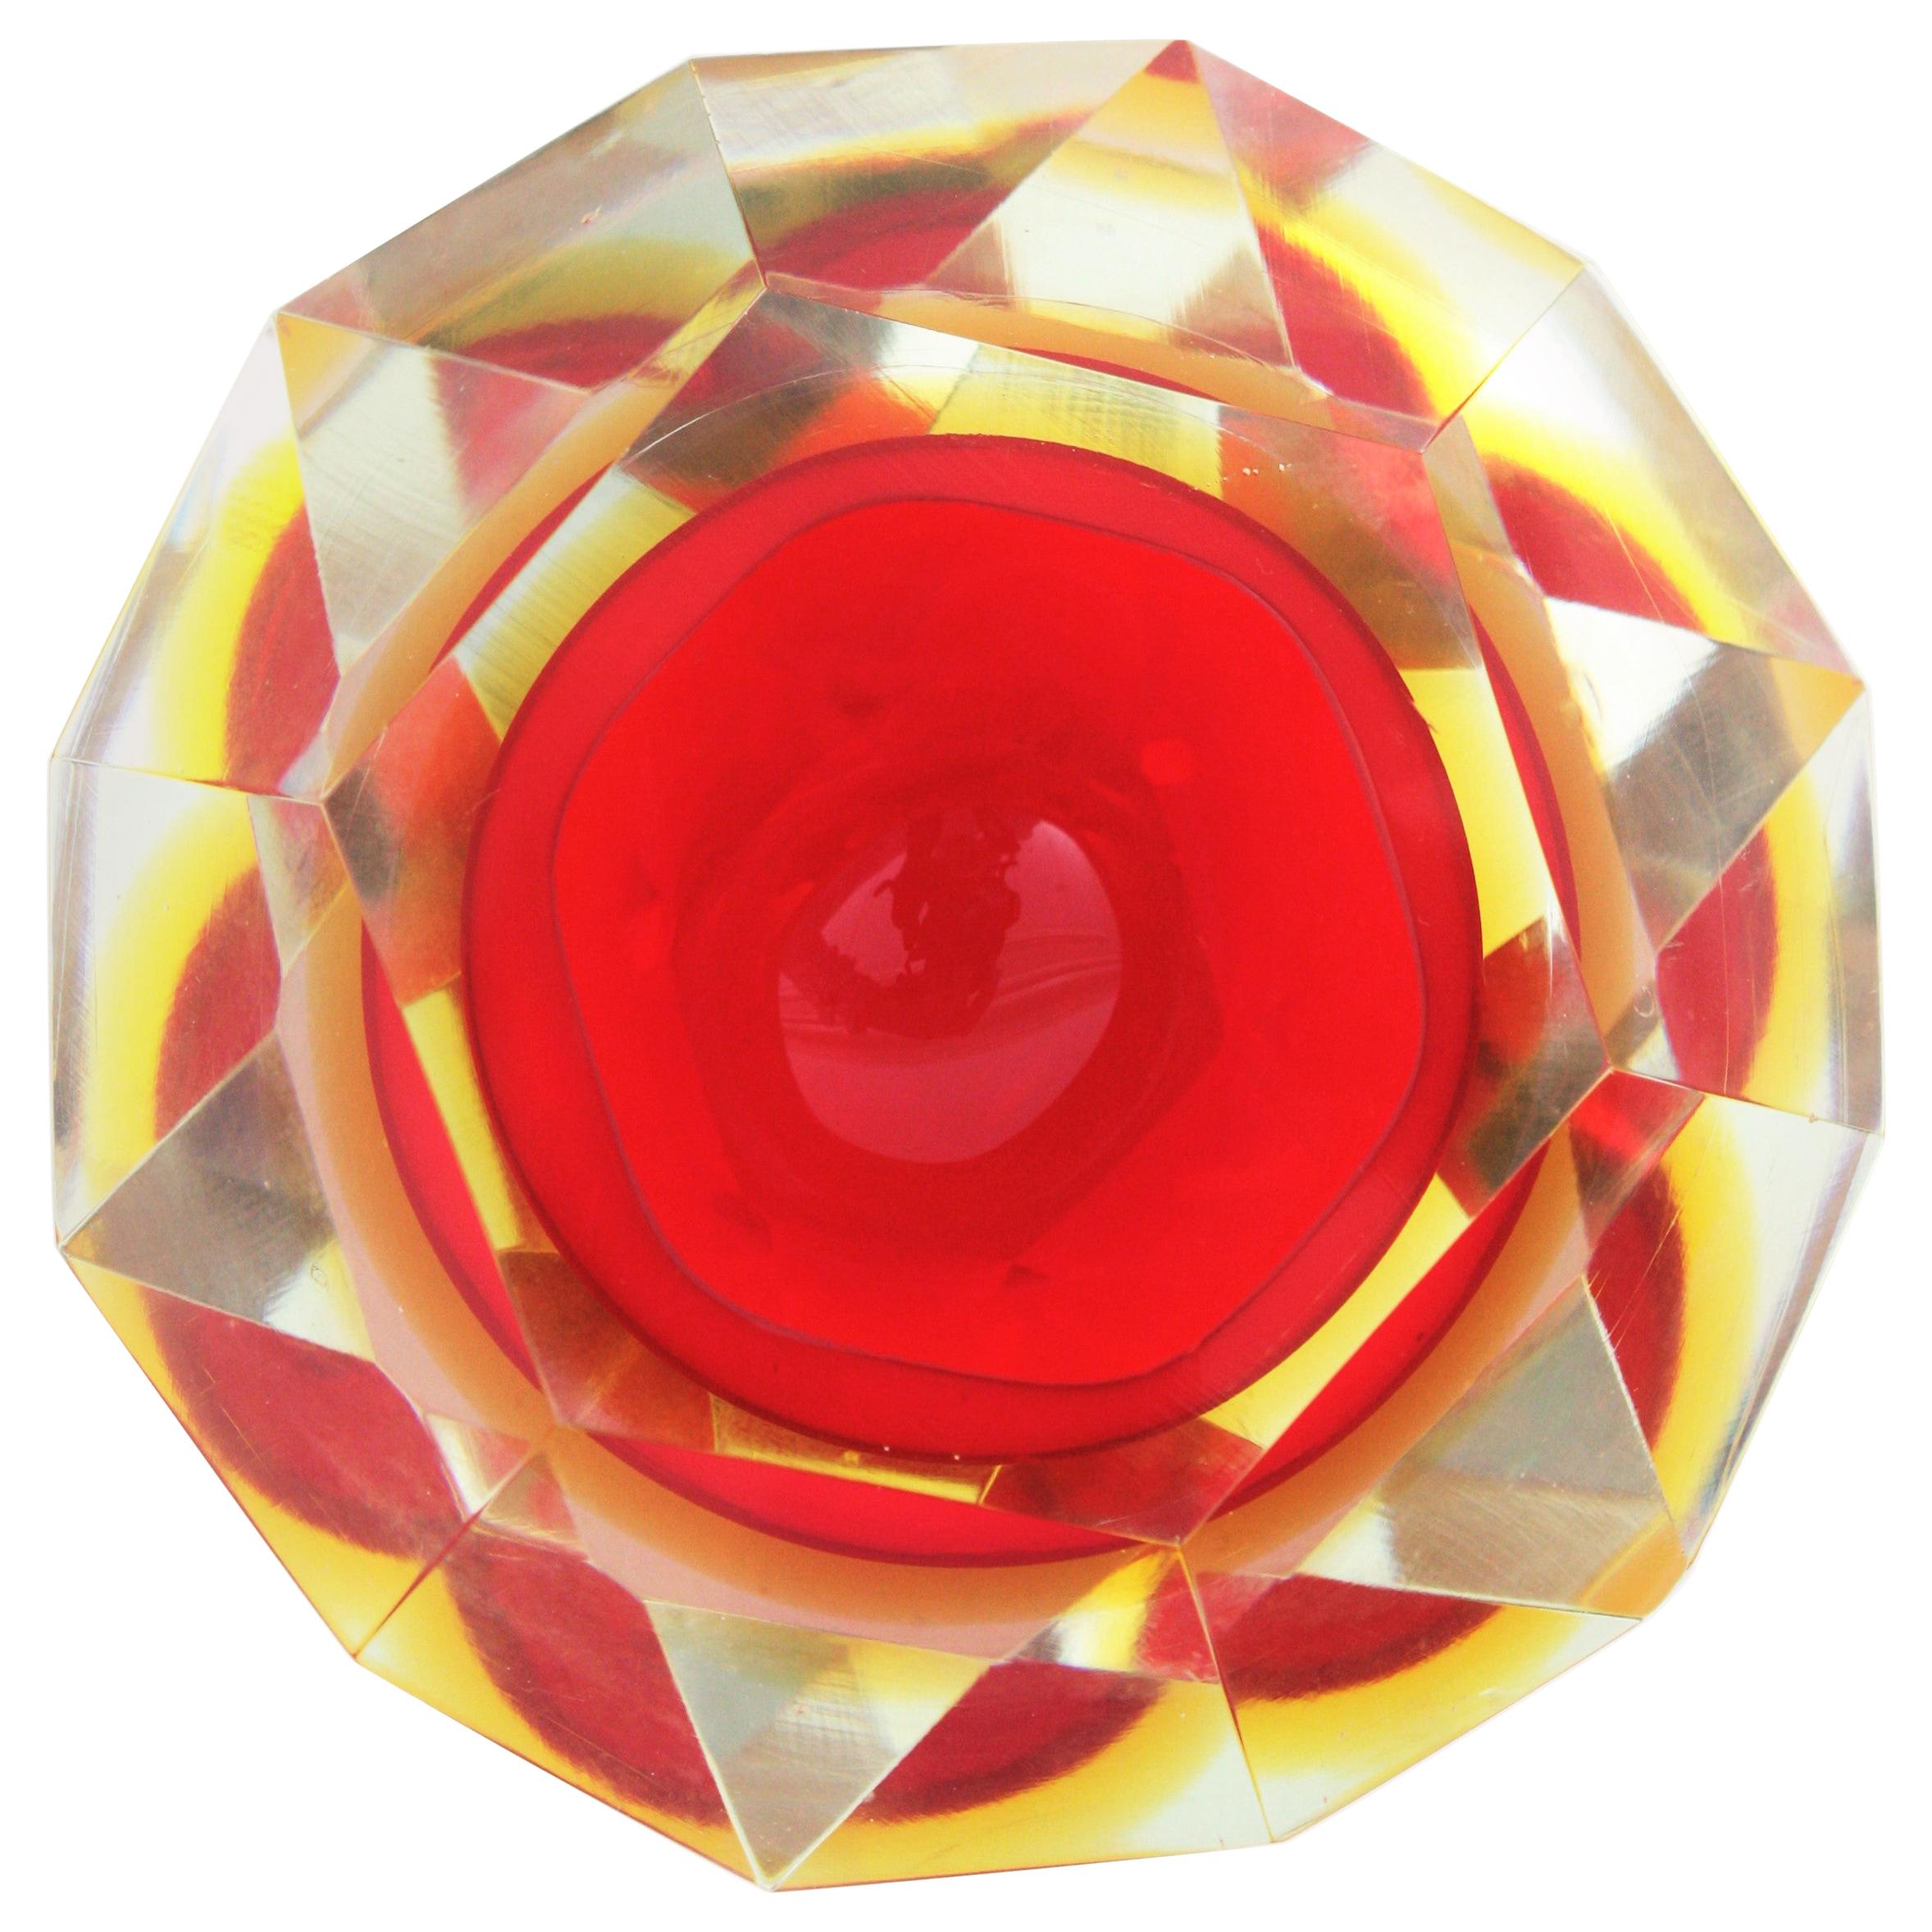 Flavio Poli Sommerso red and yellow diamond shaped faceted Murano glass bowl. Attributed to Flavio Poli for Seguso, Italy, 1950s.
This Midcentury Modern vibrant red Murano glass bowl has a layer in yellow glass submerged into clear glass using the